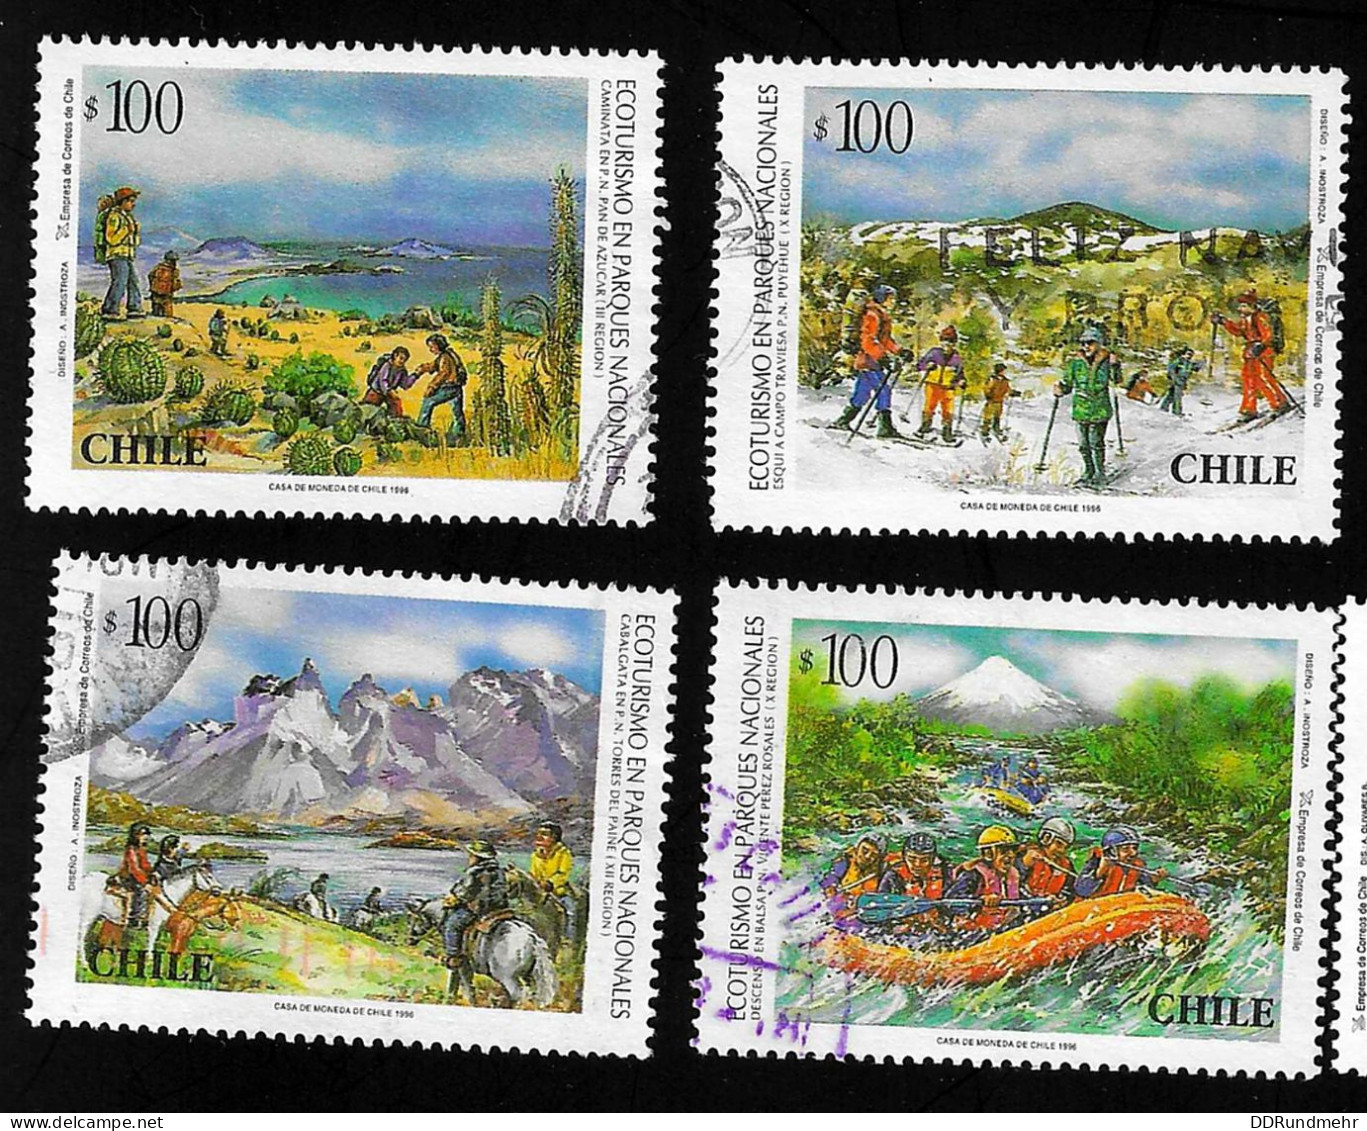 1996 Natonal Parks  Michel CL 1792 - 1795 Stamp Number CL 1185a - 1185d Yvert Et Tellier CL 1394 - 1397 Used - Chile